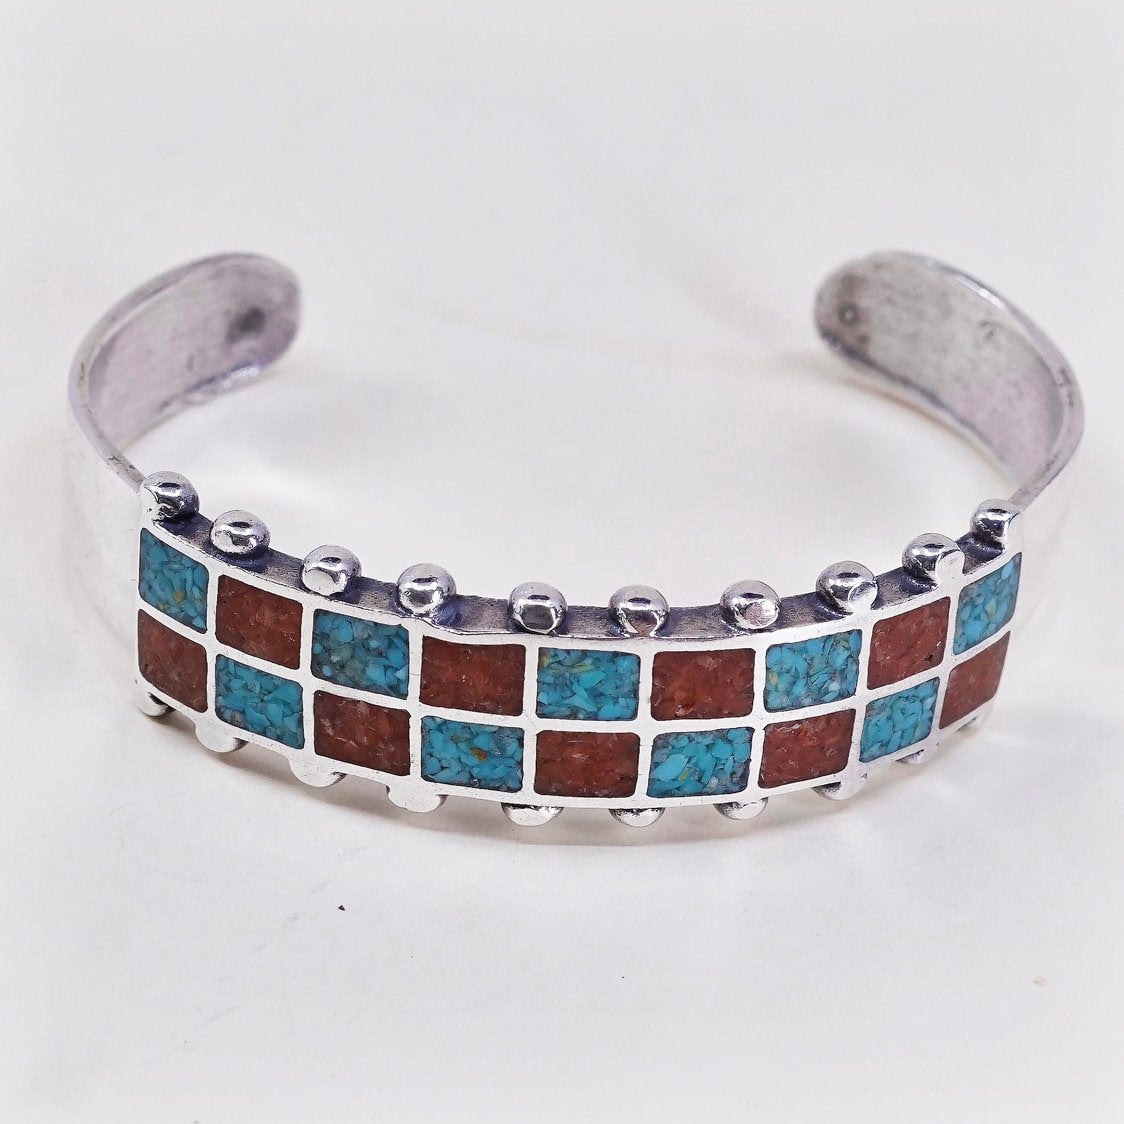 6.5", VTG mexico sterling silver cuff w/ turquoise and coral, handmade bracelet